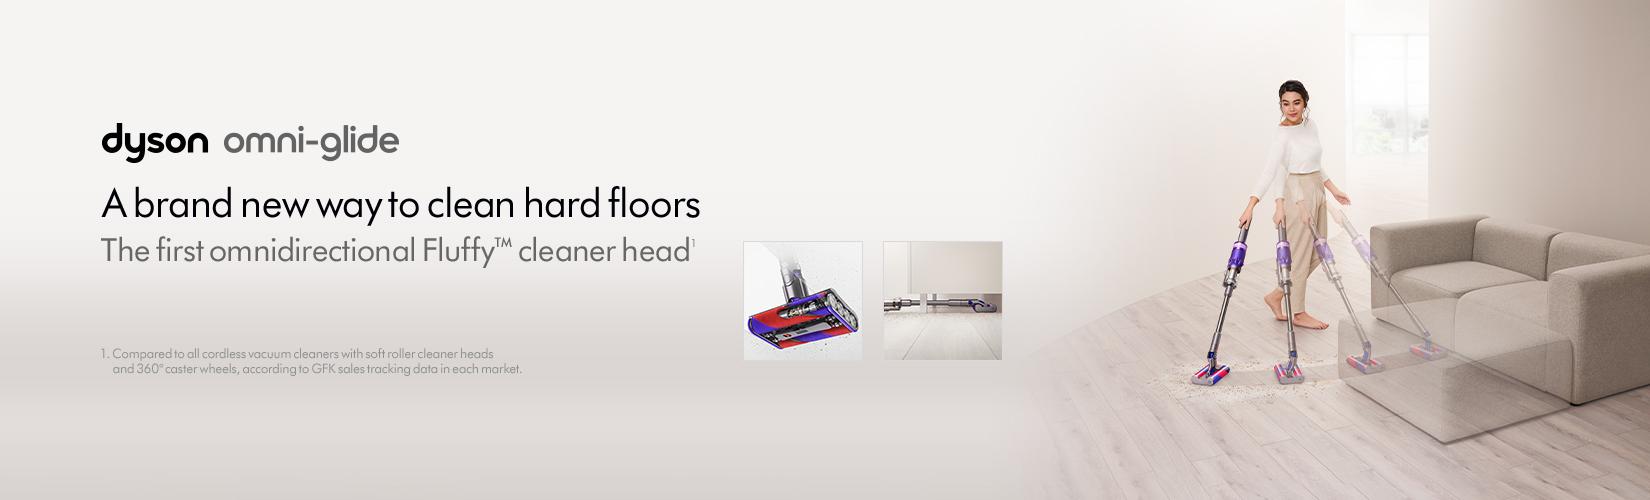 Dyson omni-glide. A Brand new way to clean hard floors. The first omnidirectional Fluffy cleaner head.